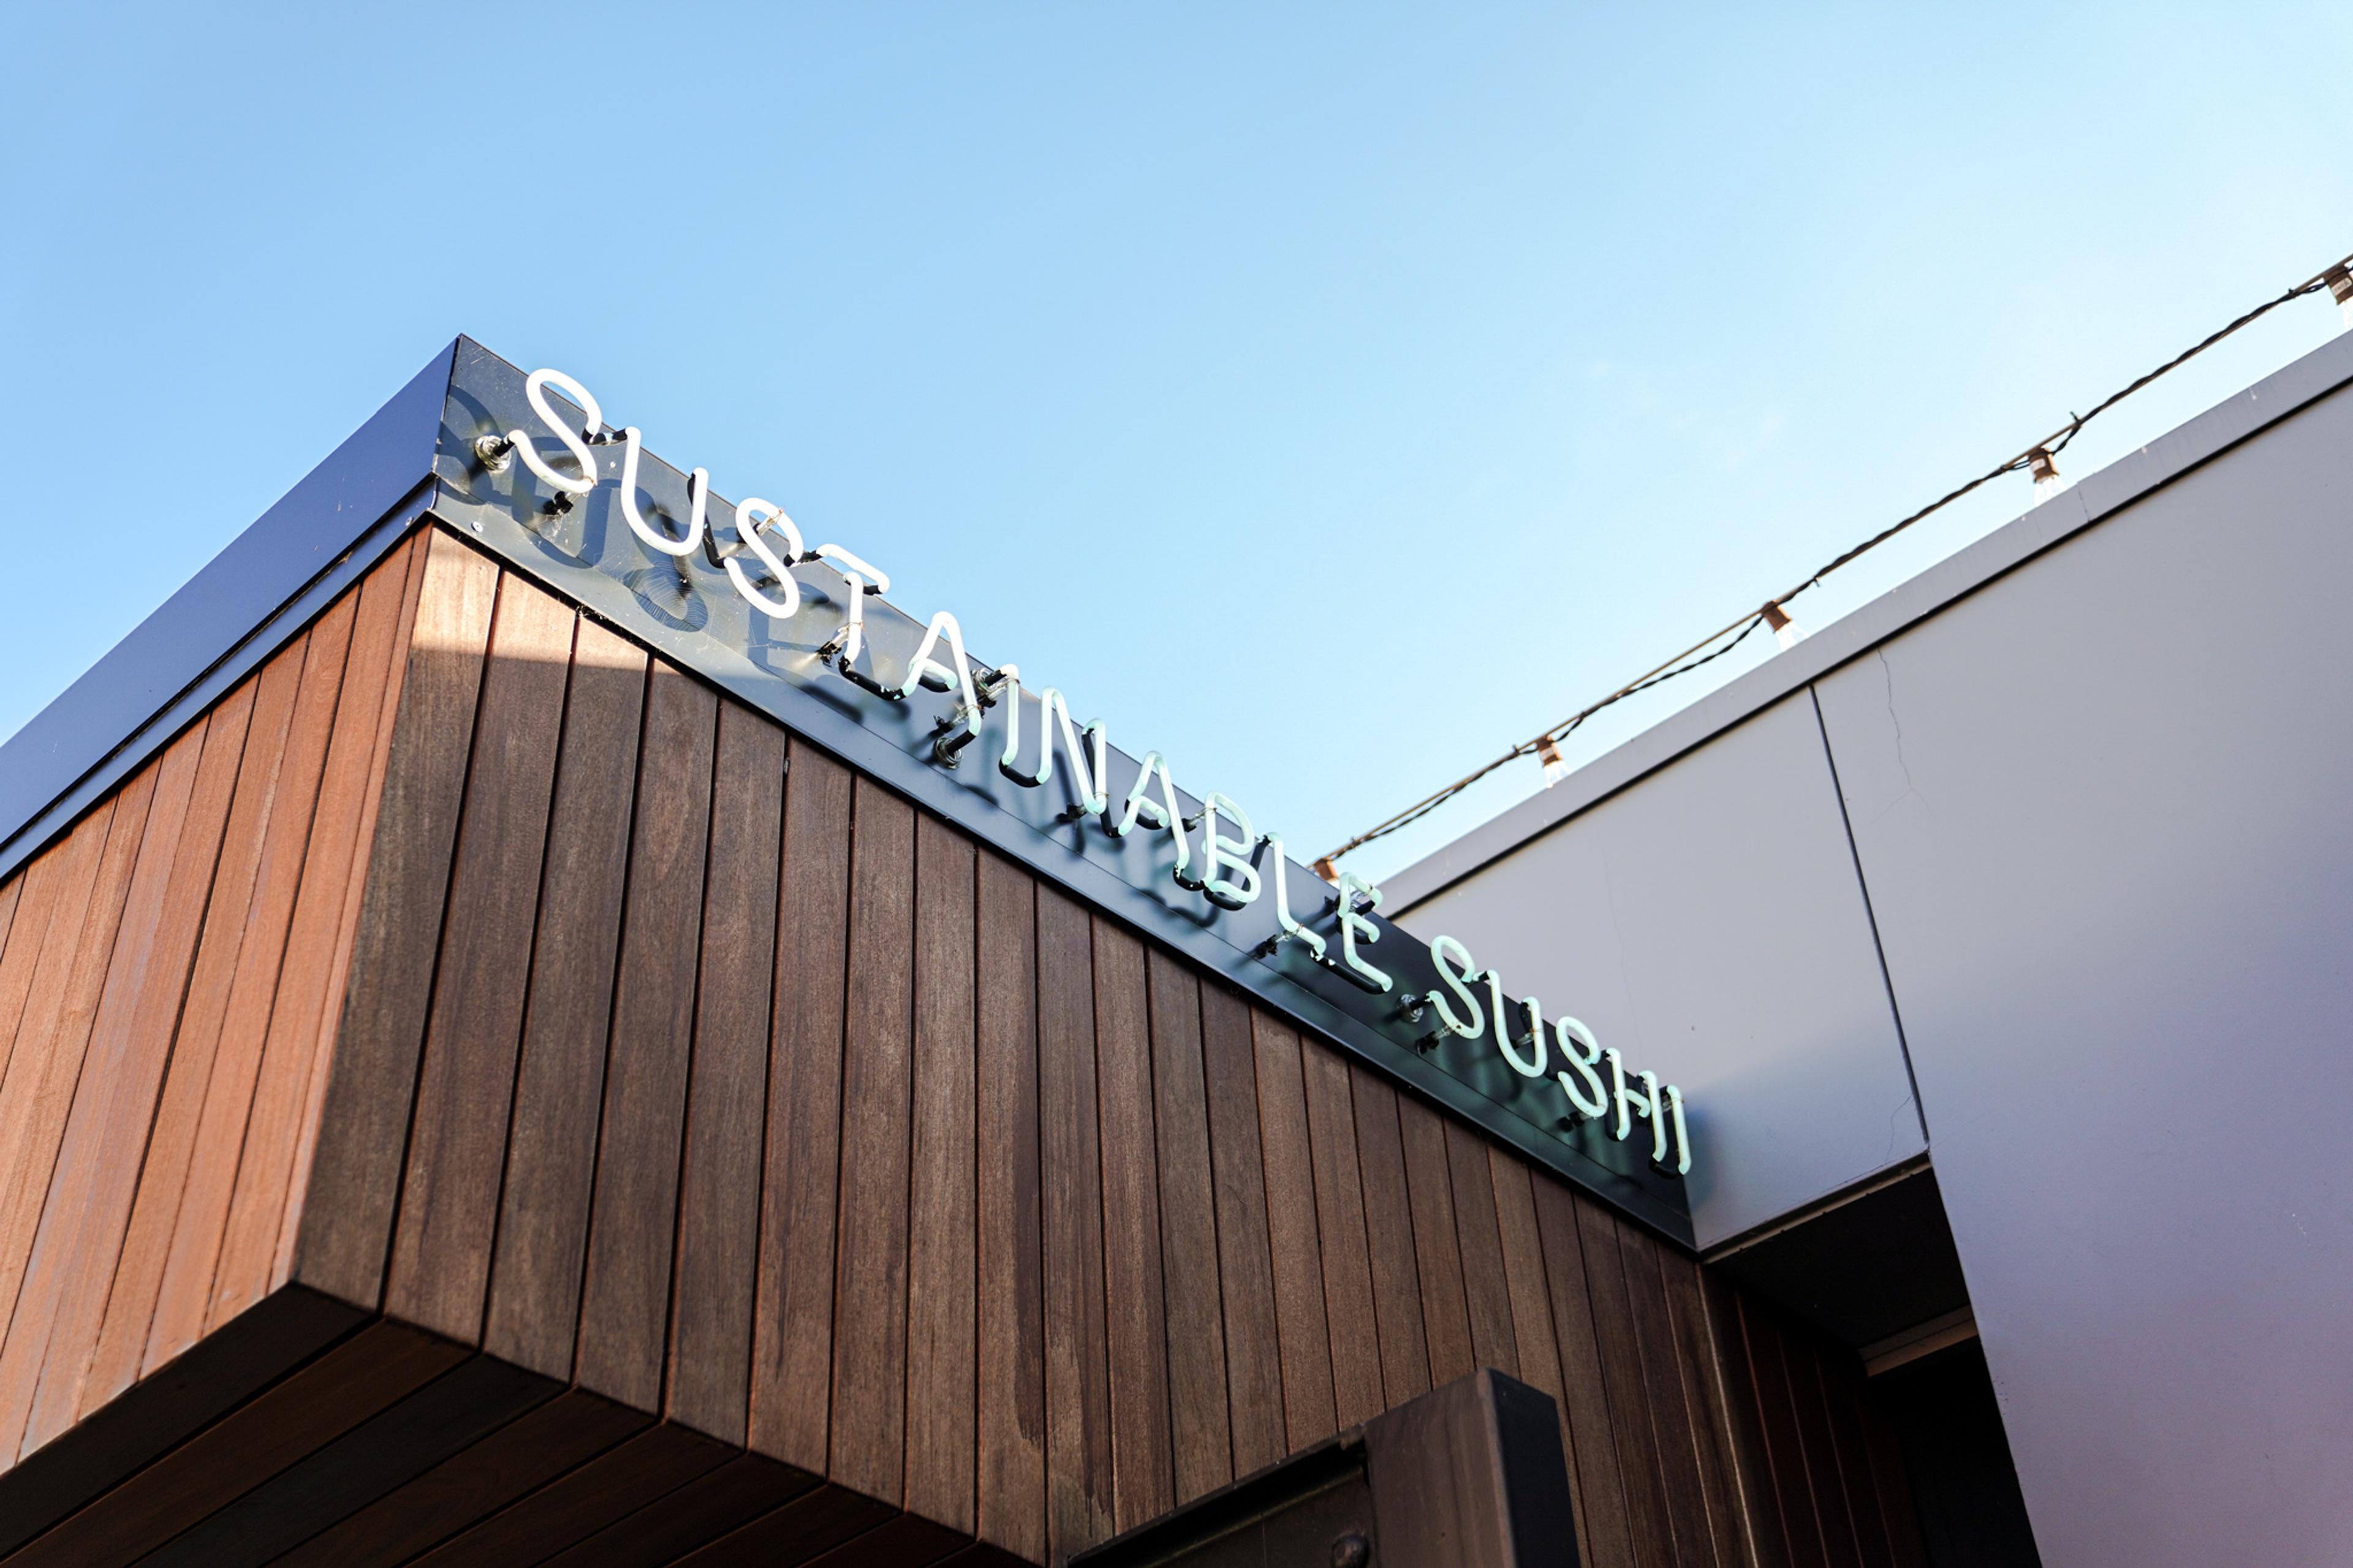 A neon "Sustainable Sushi" sign at the entrance of the University Village Bamboo Sushi restaurant.